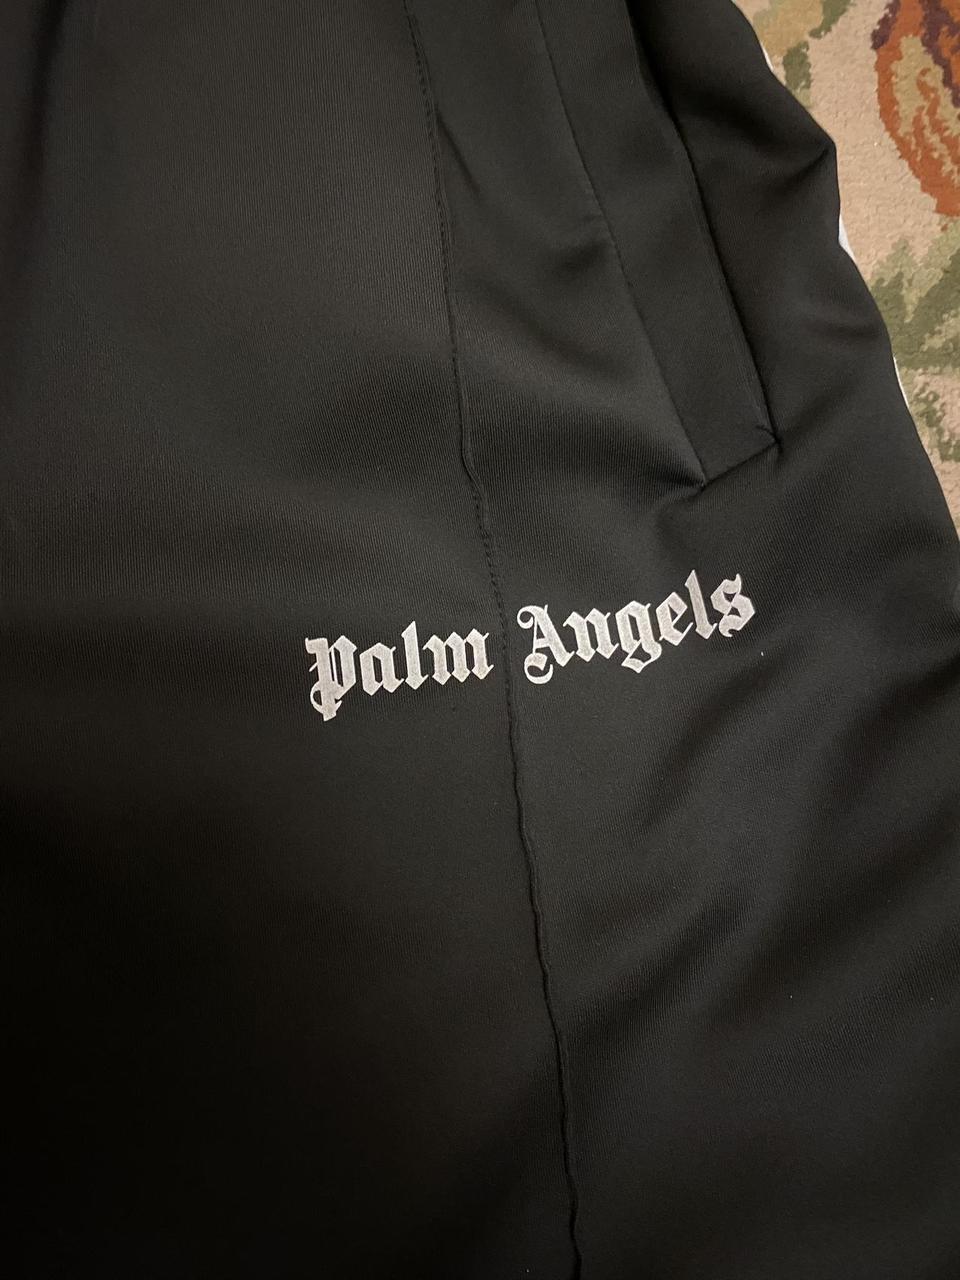 Palm Angels Trackpants Black Size M. Item is used.... - Depop